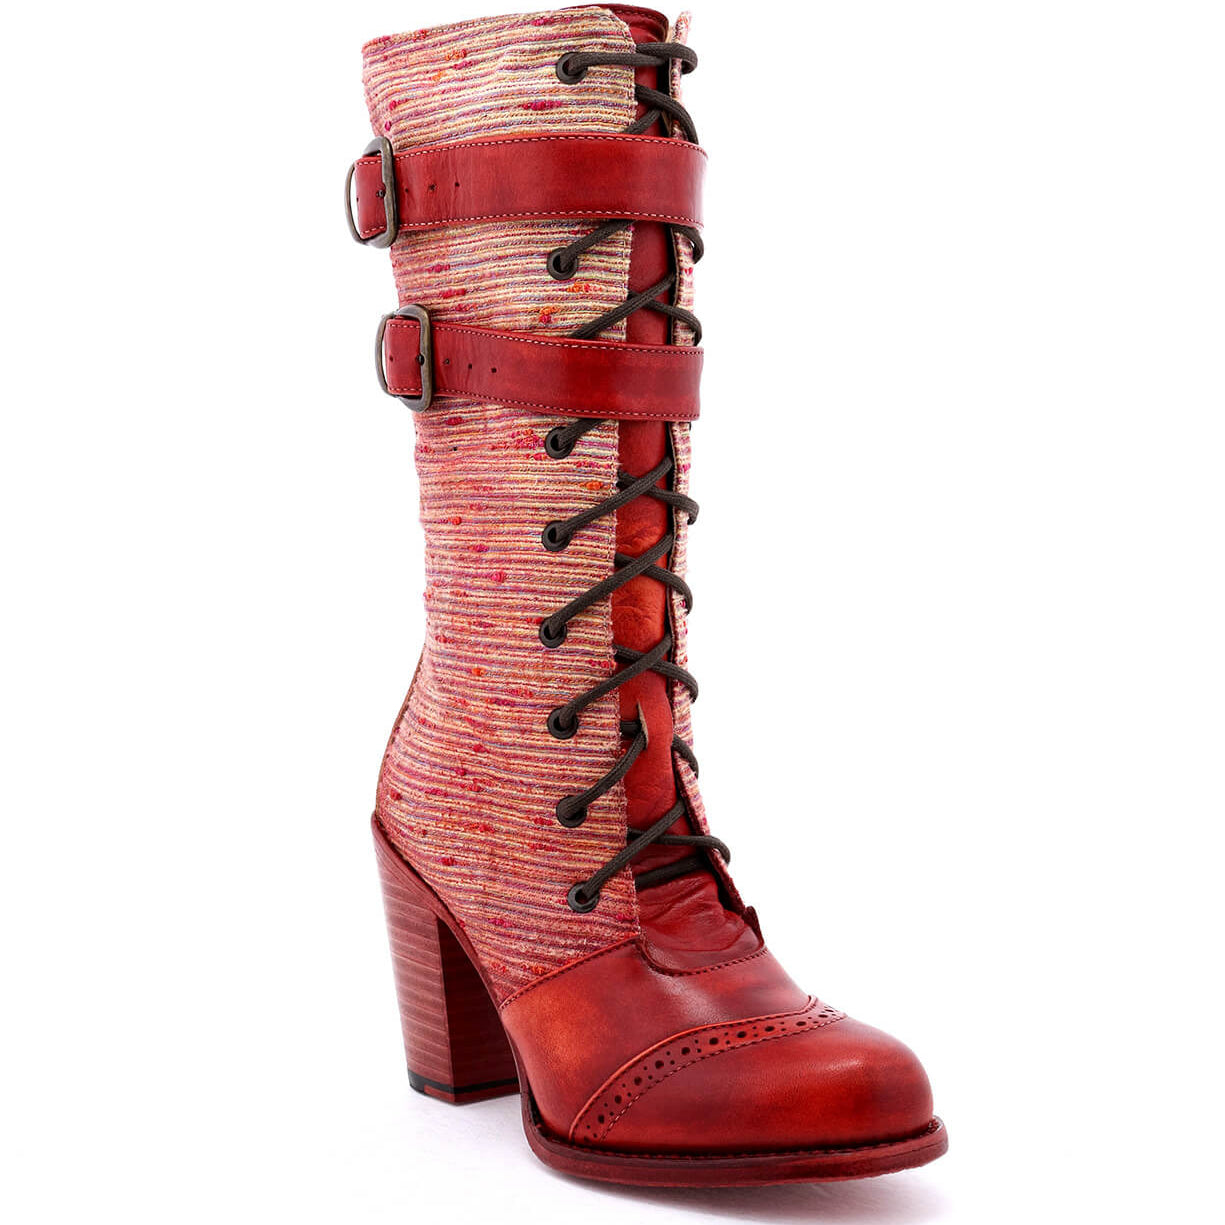 An Arabella women's red high heeled leather boot with a buckle and whimsical print from Oak Tree Farms.